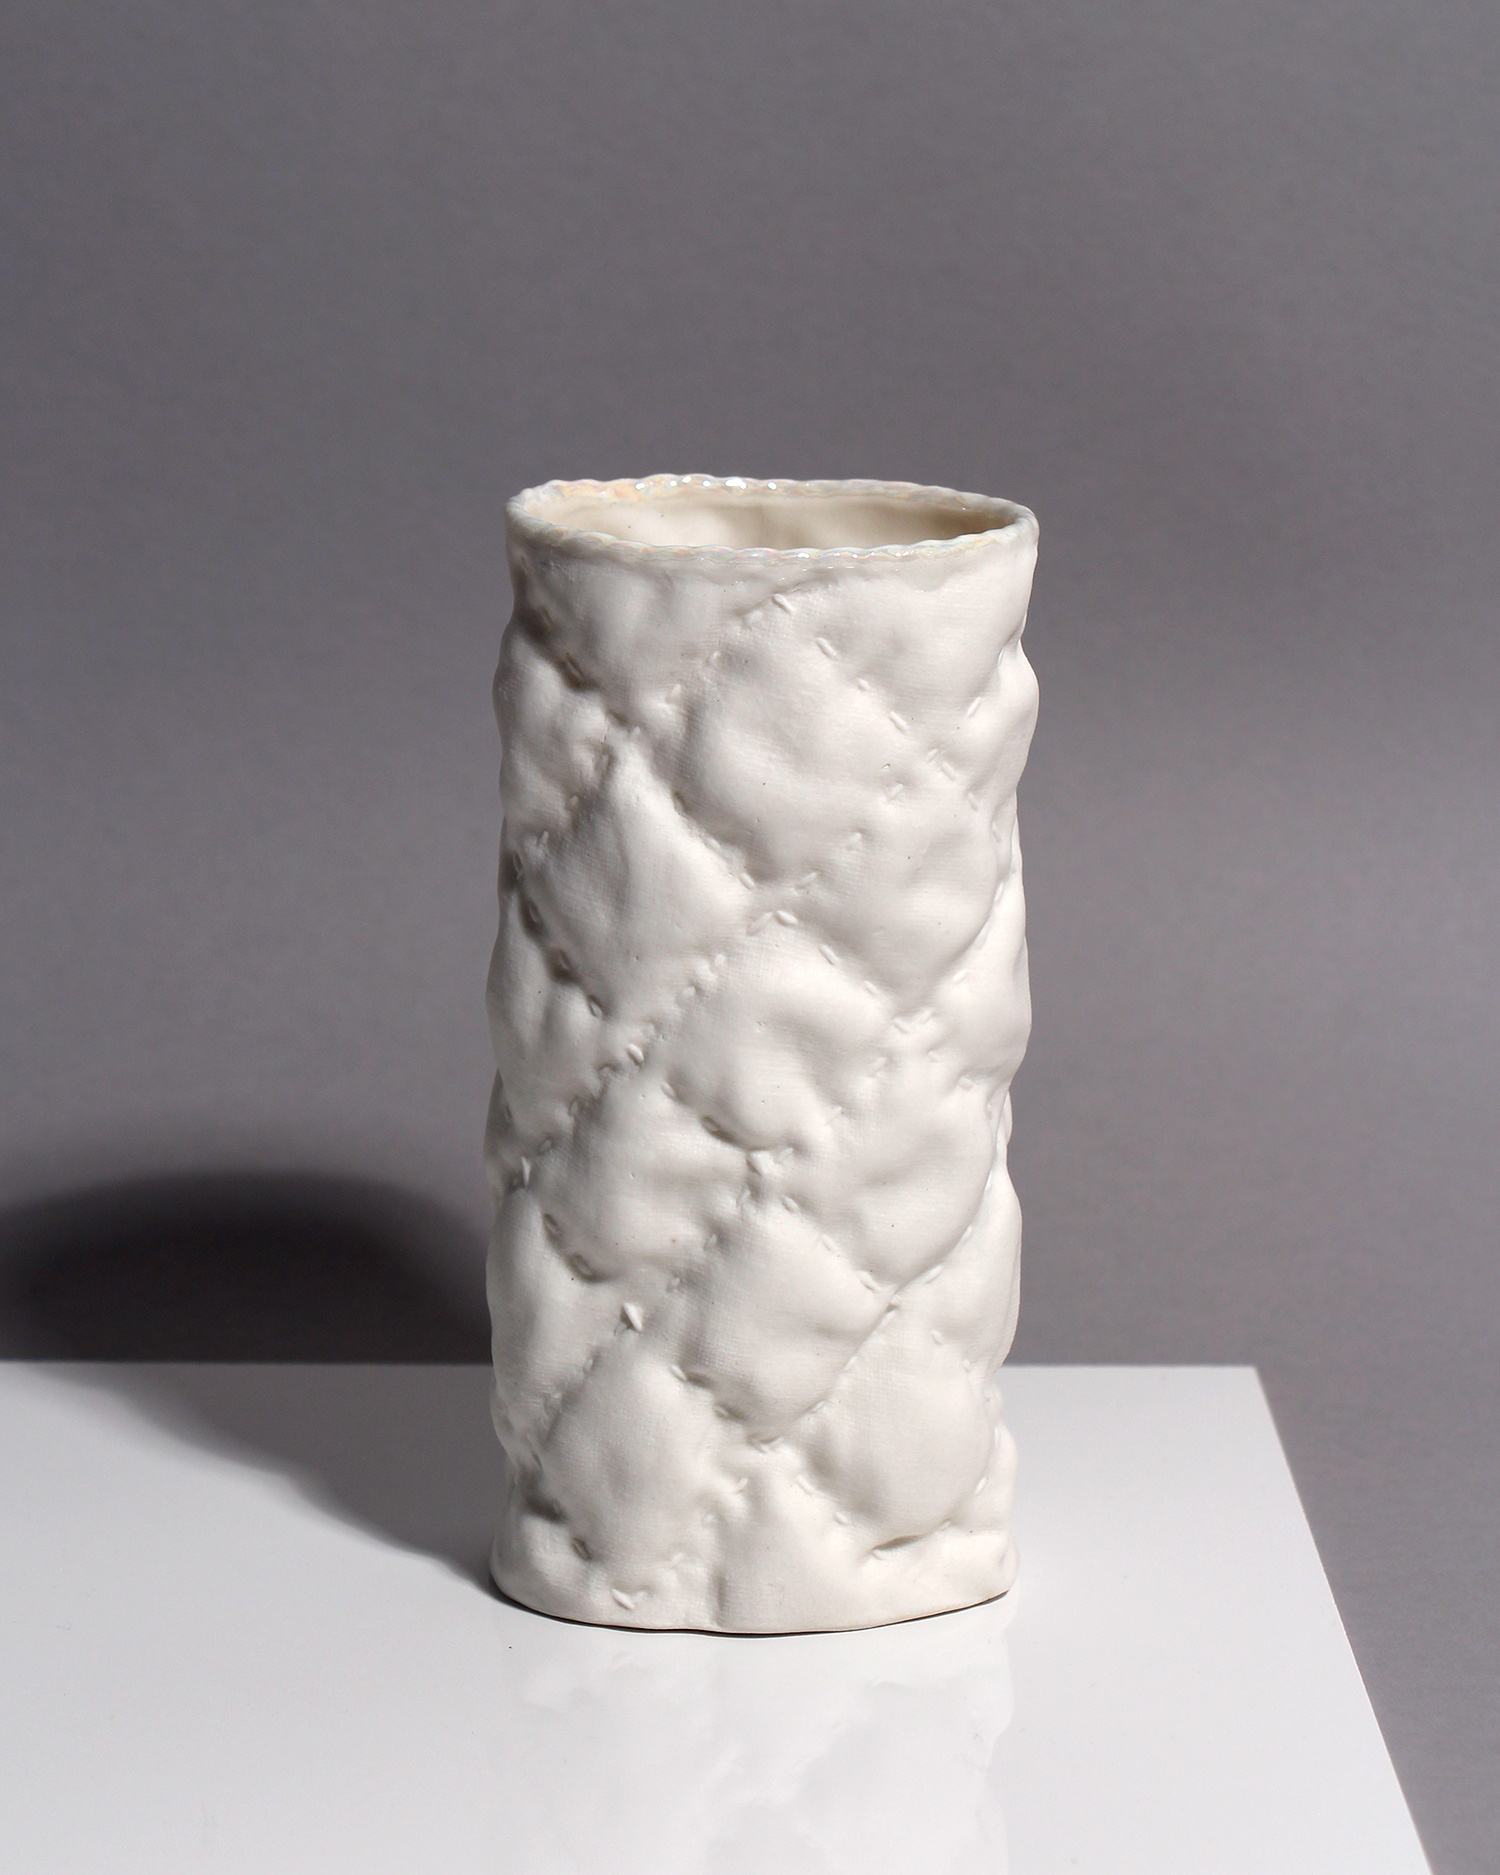 Stitched Quilting Oval Vase by Sarah Grove